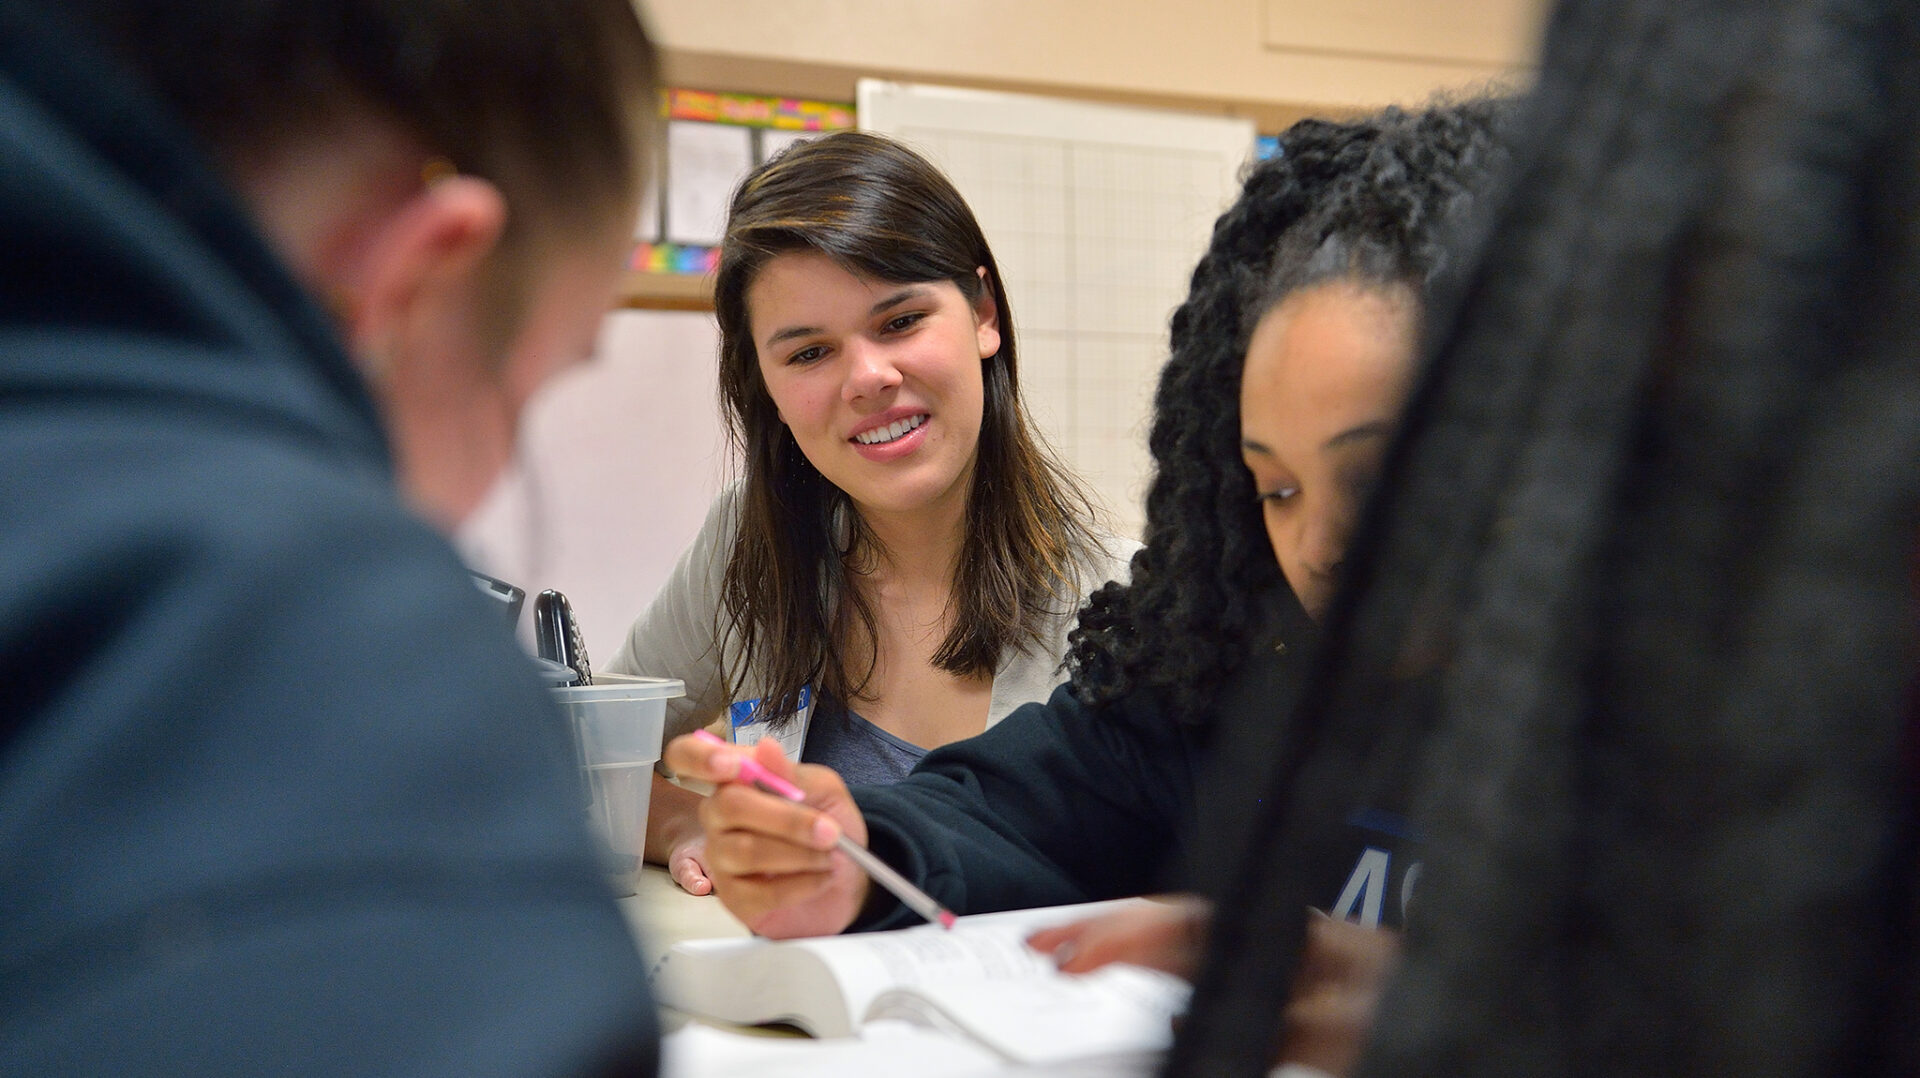 METP seniors, including Emily Reynolds of Madison, have gained hands-on teaching experience since freshman year as part of the program.Photo by Thomas Graning/Ole Miss Communications